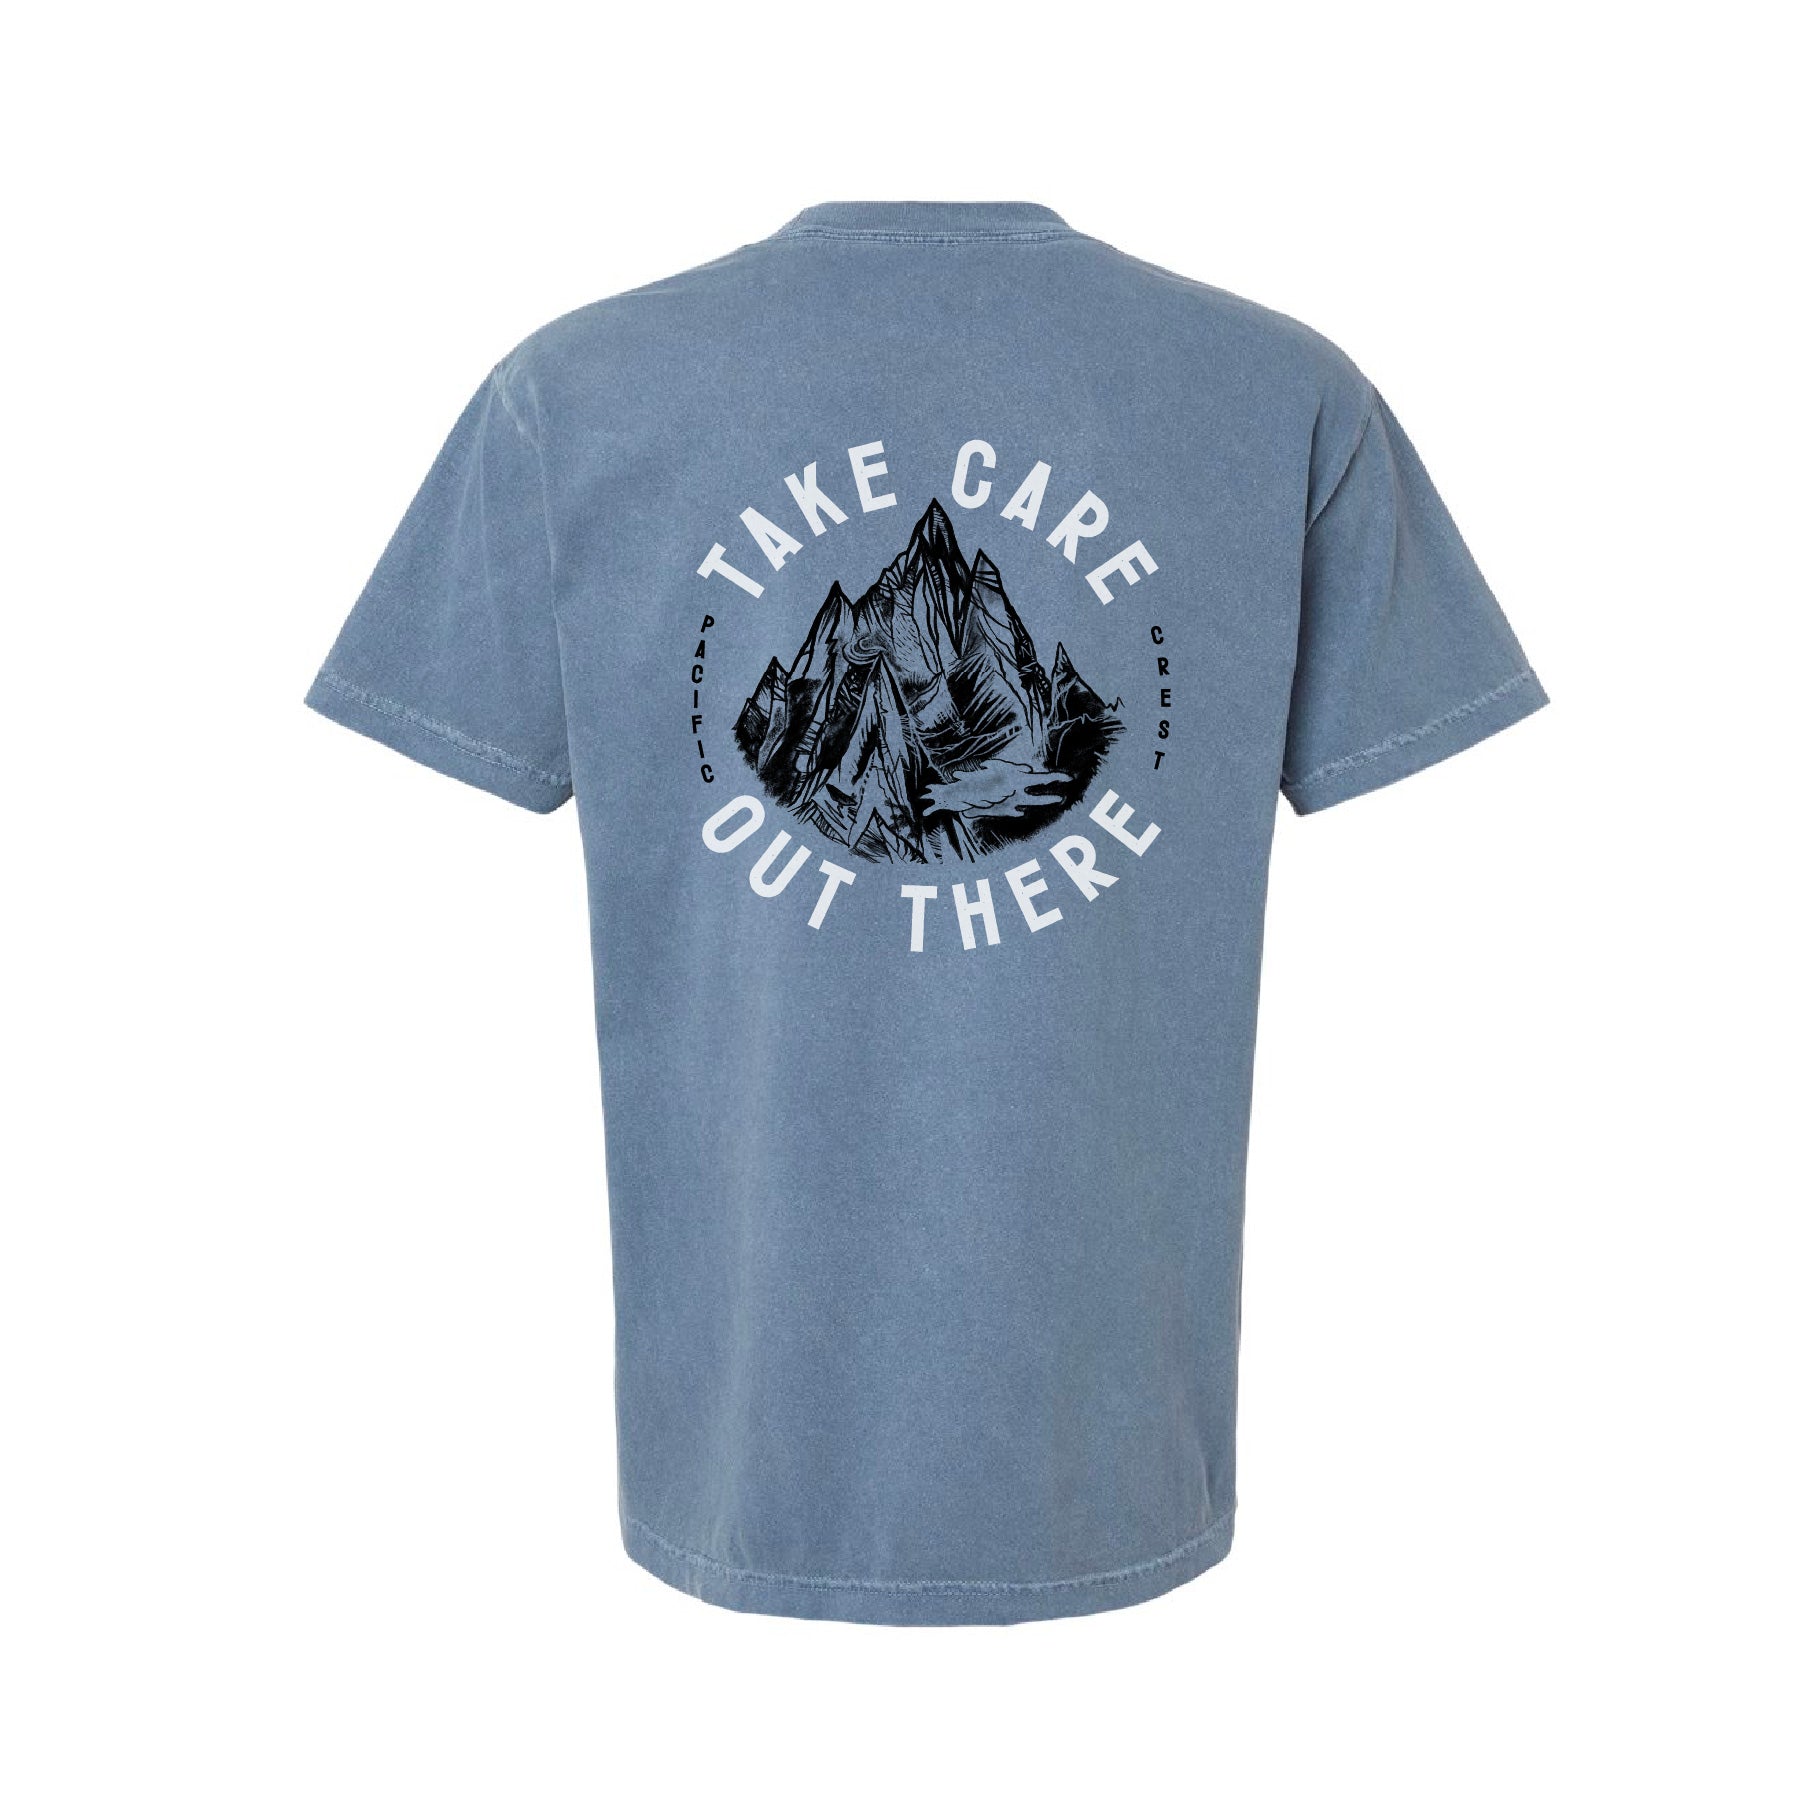 Take Care Out There- Heritage Tee